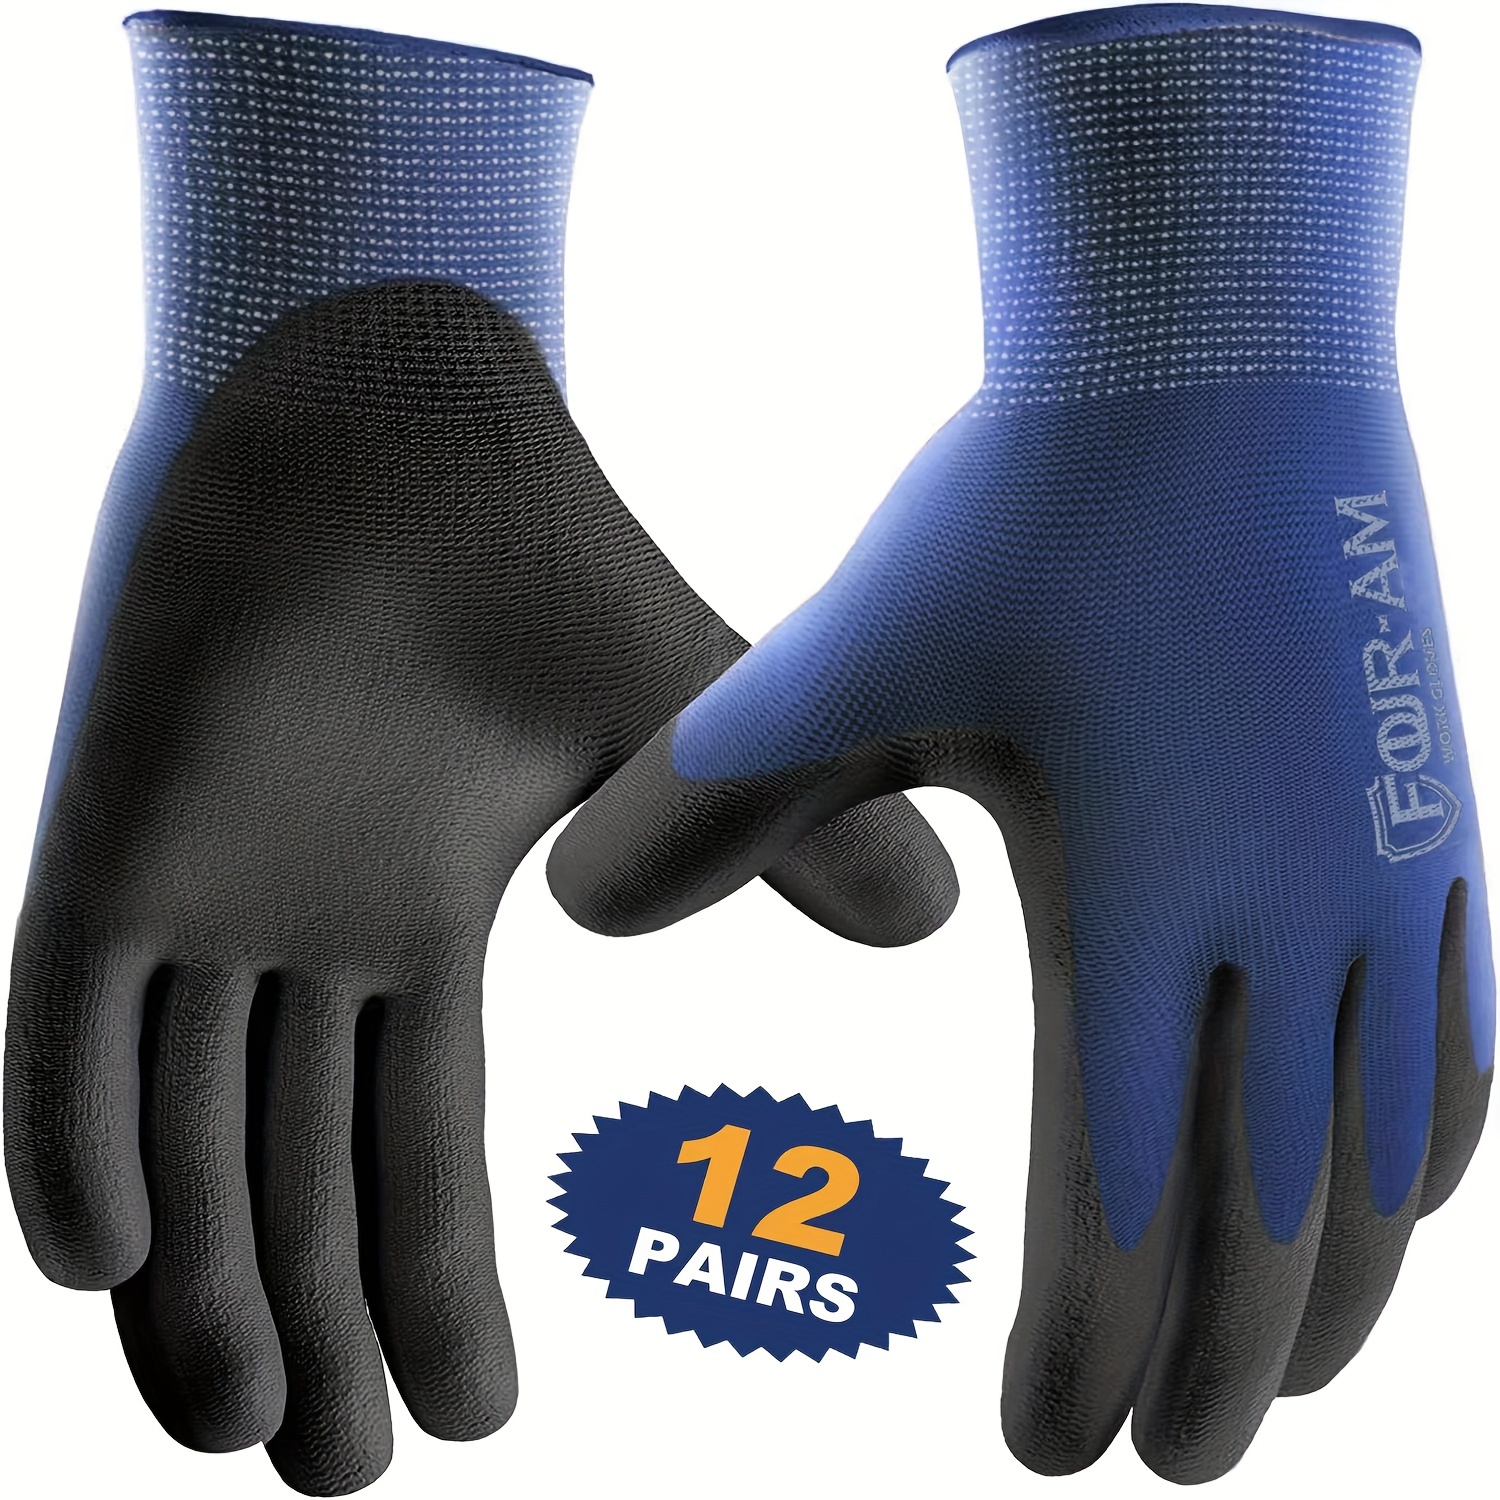 COOLJOB 13 Gauge Safety Work Gloves PU Coated 12 Pairs Large, Ultra-lite  Polyurethane Working Gloves with Grip for Men Women, Seamless Knit for